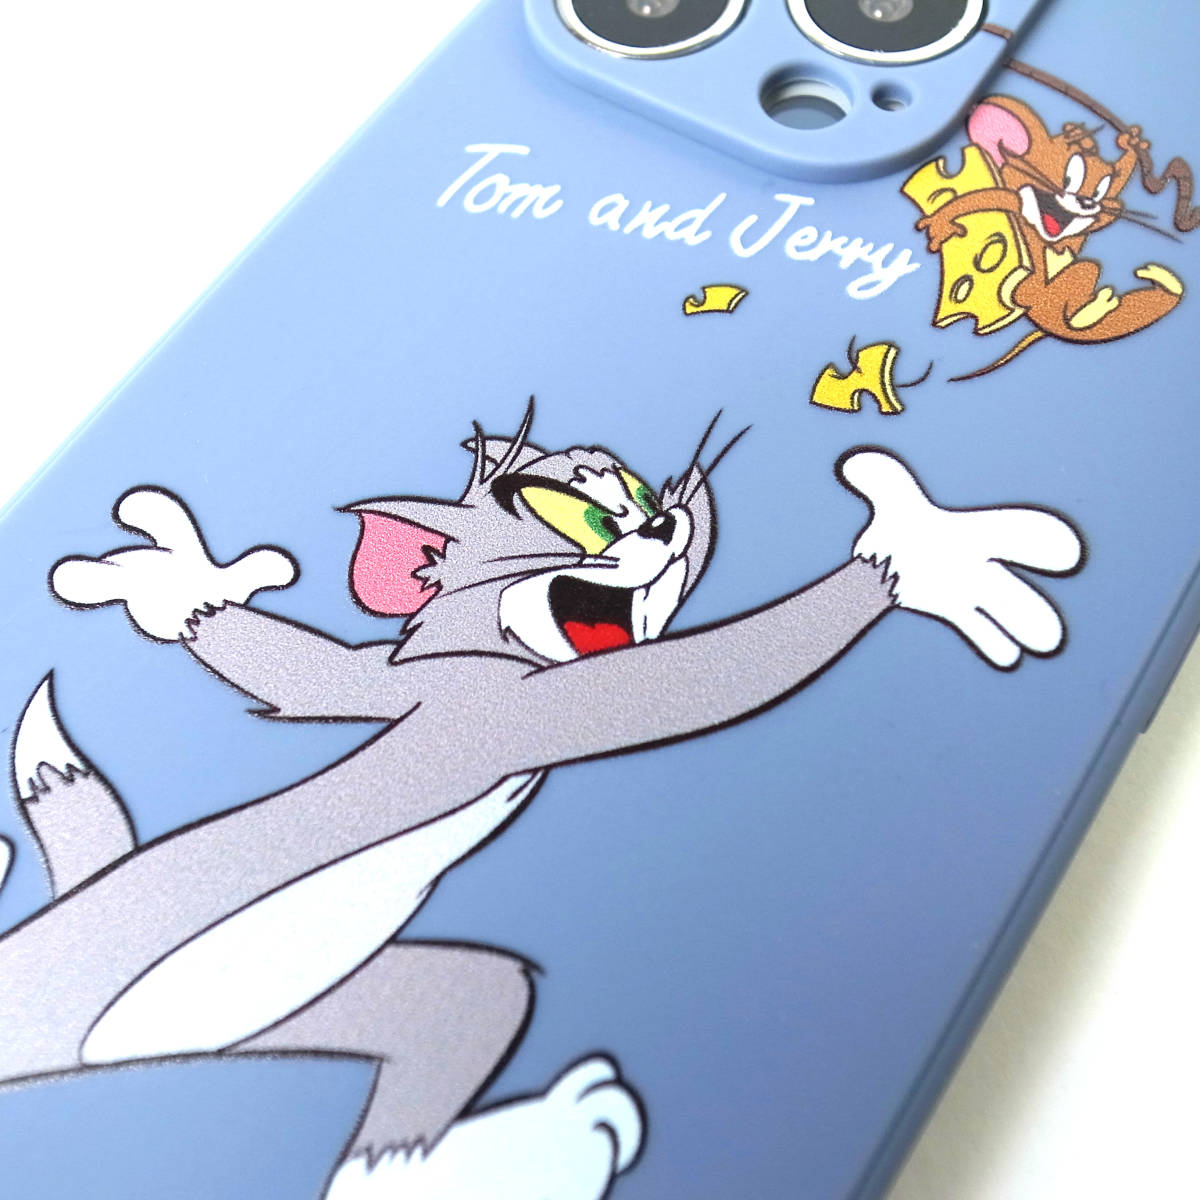  Tom . Jerry FUNNY iPhone13Pro case liquid crystal film attaching sax blue * iPhone14 case iPhone13 case is complete sale 